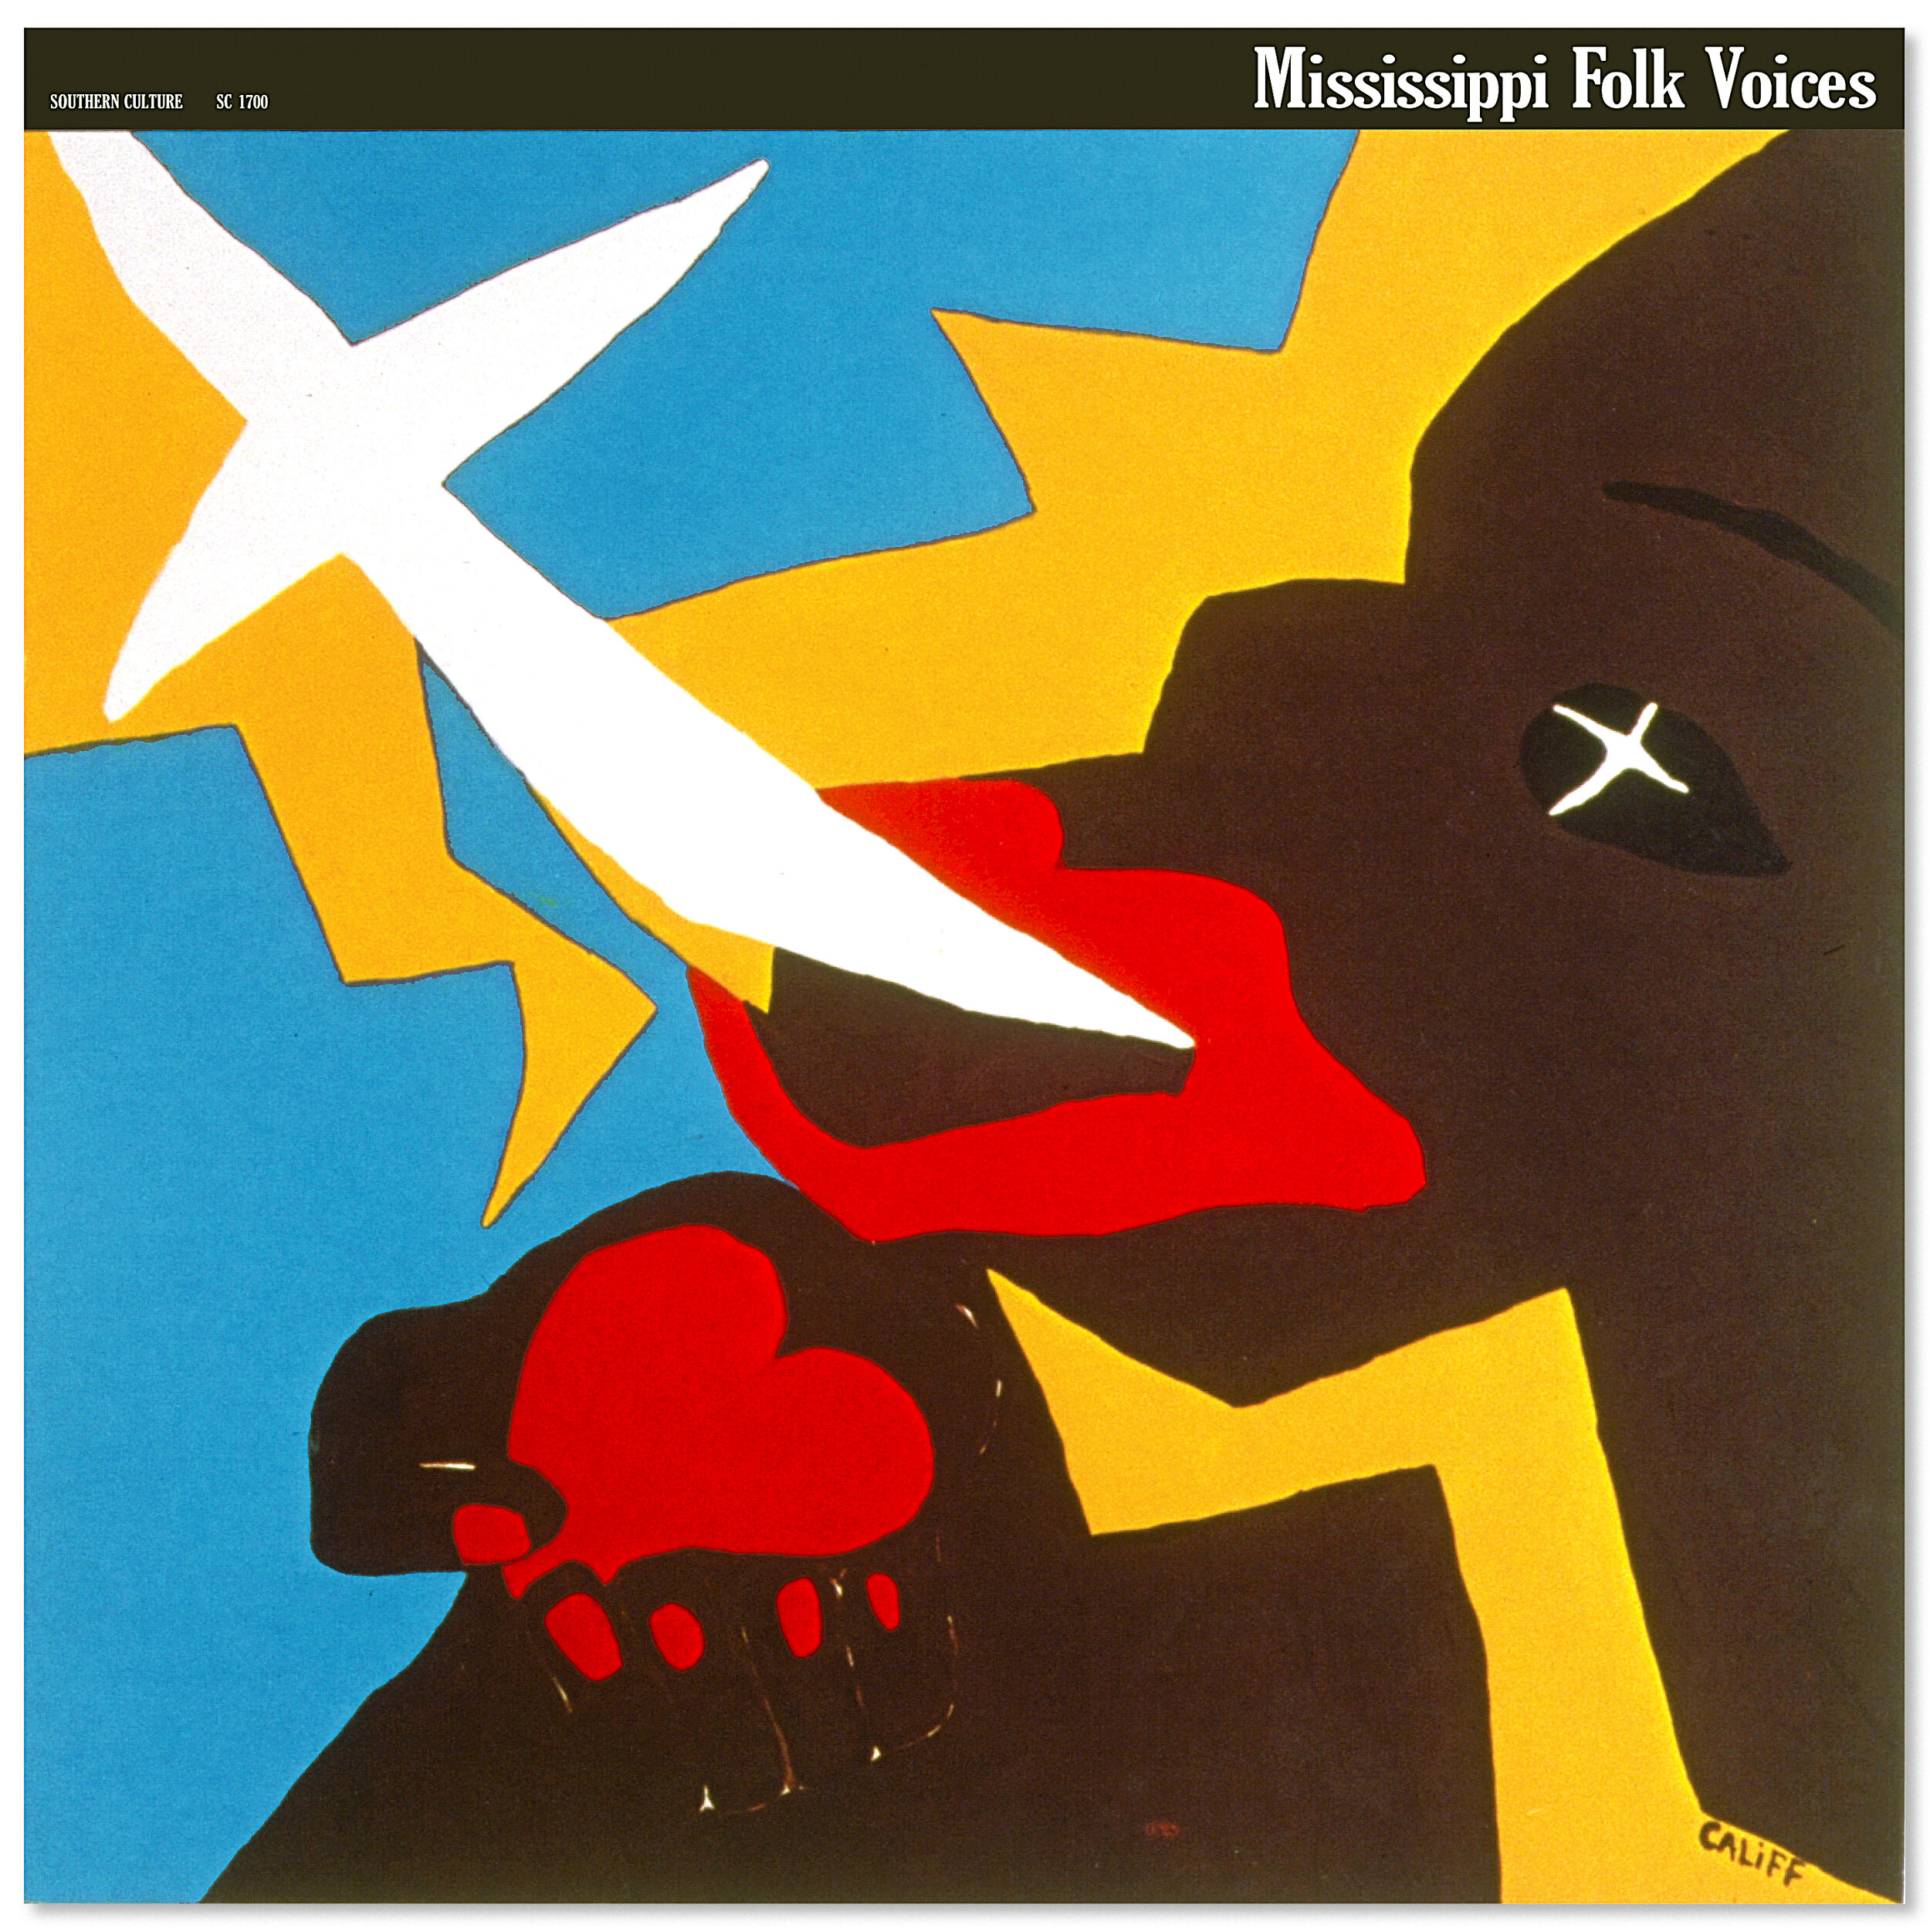  Mississippi Folk Voices  Various artists  Center for the Study of Southern Culture Album Series  William Ferris  Oxford, Mississippi  Creative direction, concept, design and production supervision by Chuck Mitchell  Illustration by Mara Califf  Prod